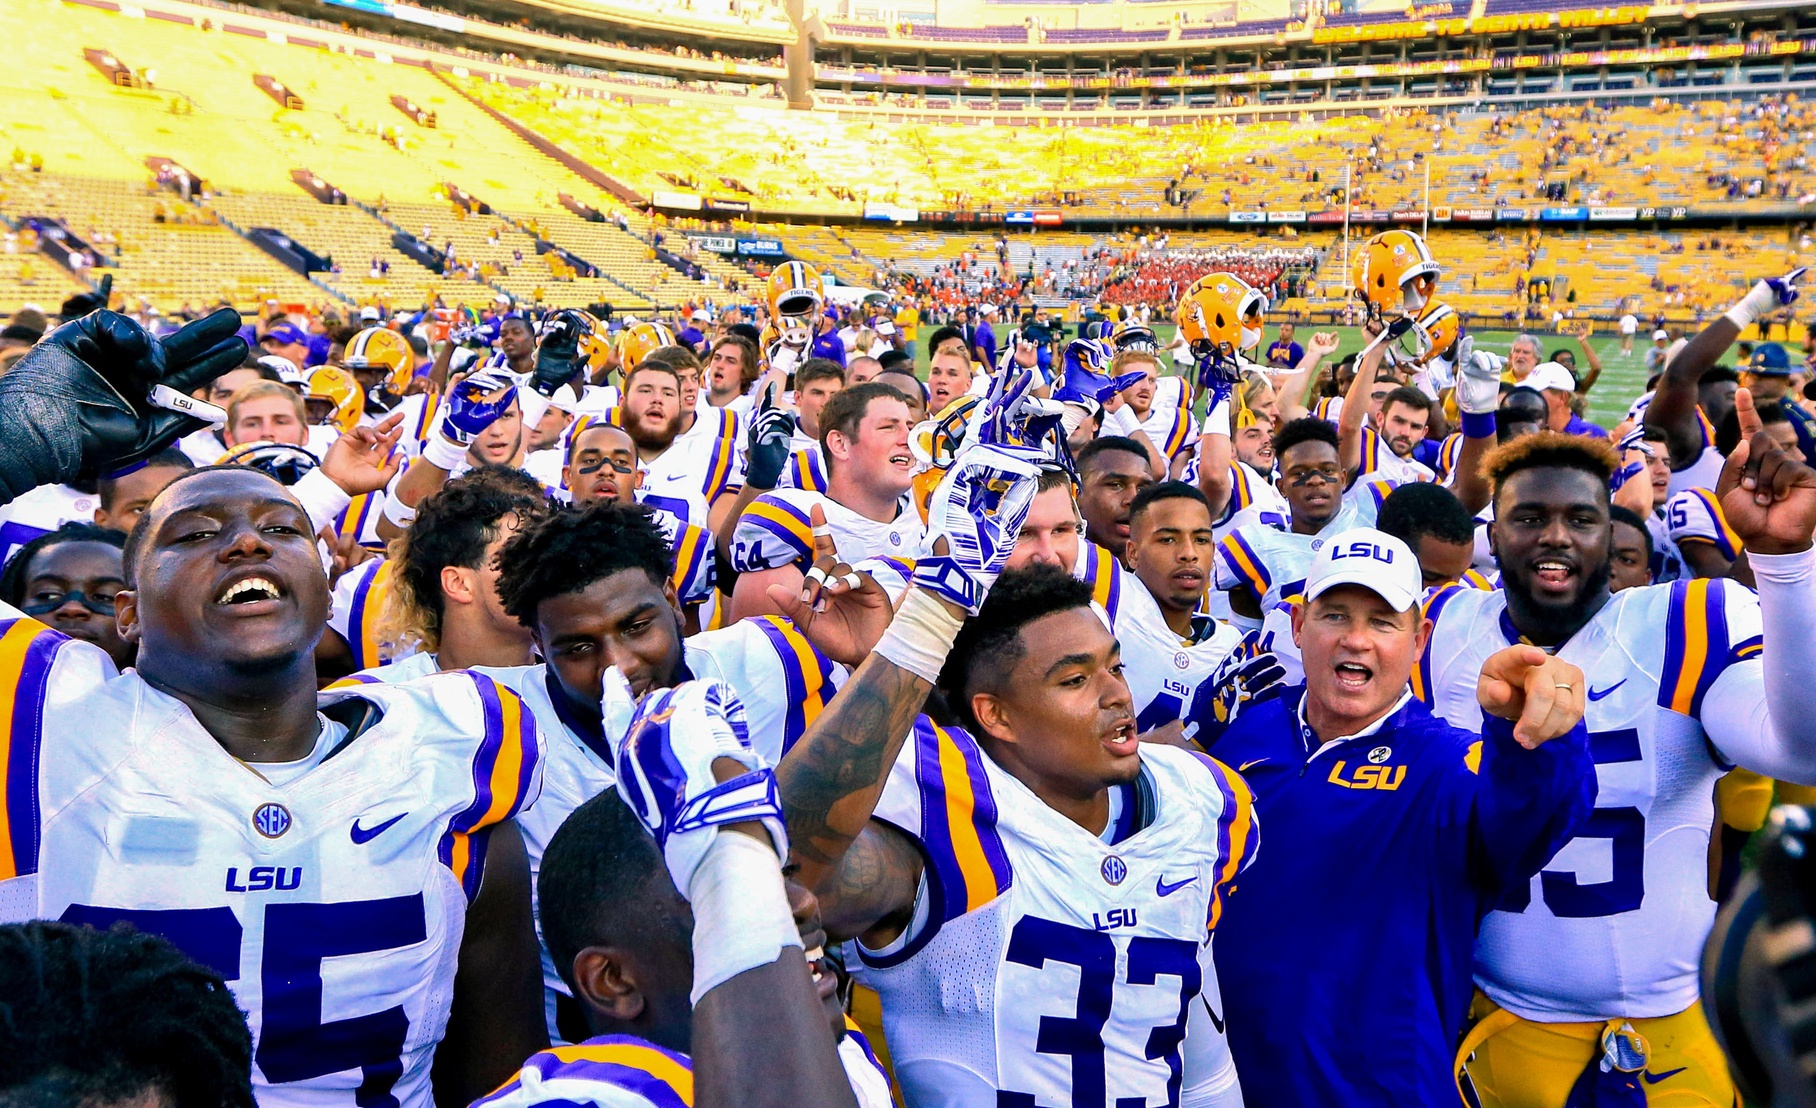 Sep 19, 2015; Baton Rouge, LA, USA; LSU Tigers head coach Les Miles and players celebrate following a win against the Auburn Tigers in a game at Tiger Stadium. LSU defeated Auburn 45-21. Mandatory Credit: Derick E. Hingle-USA TODAY Sports